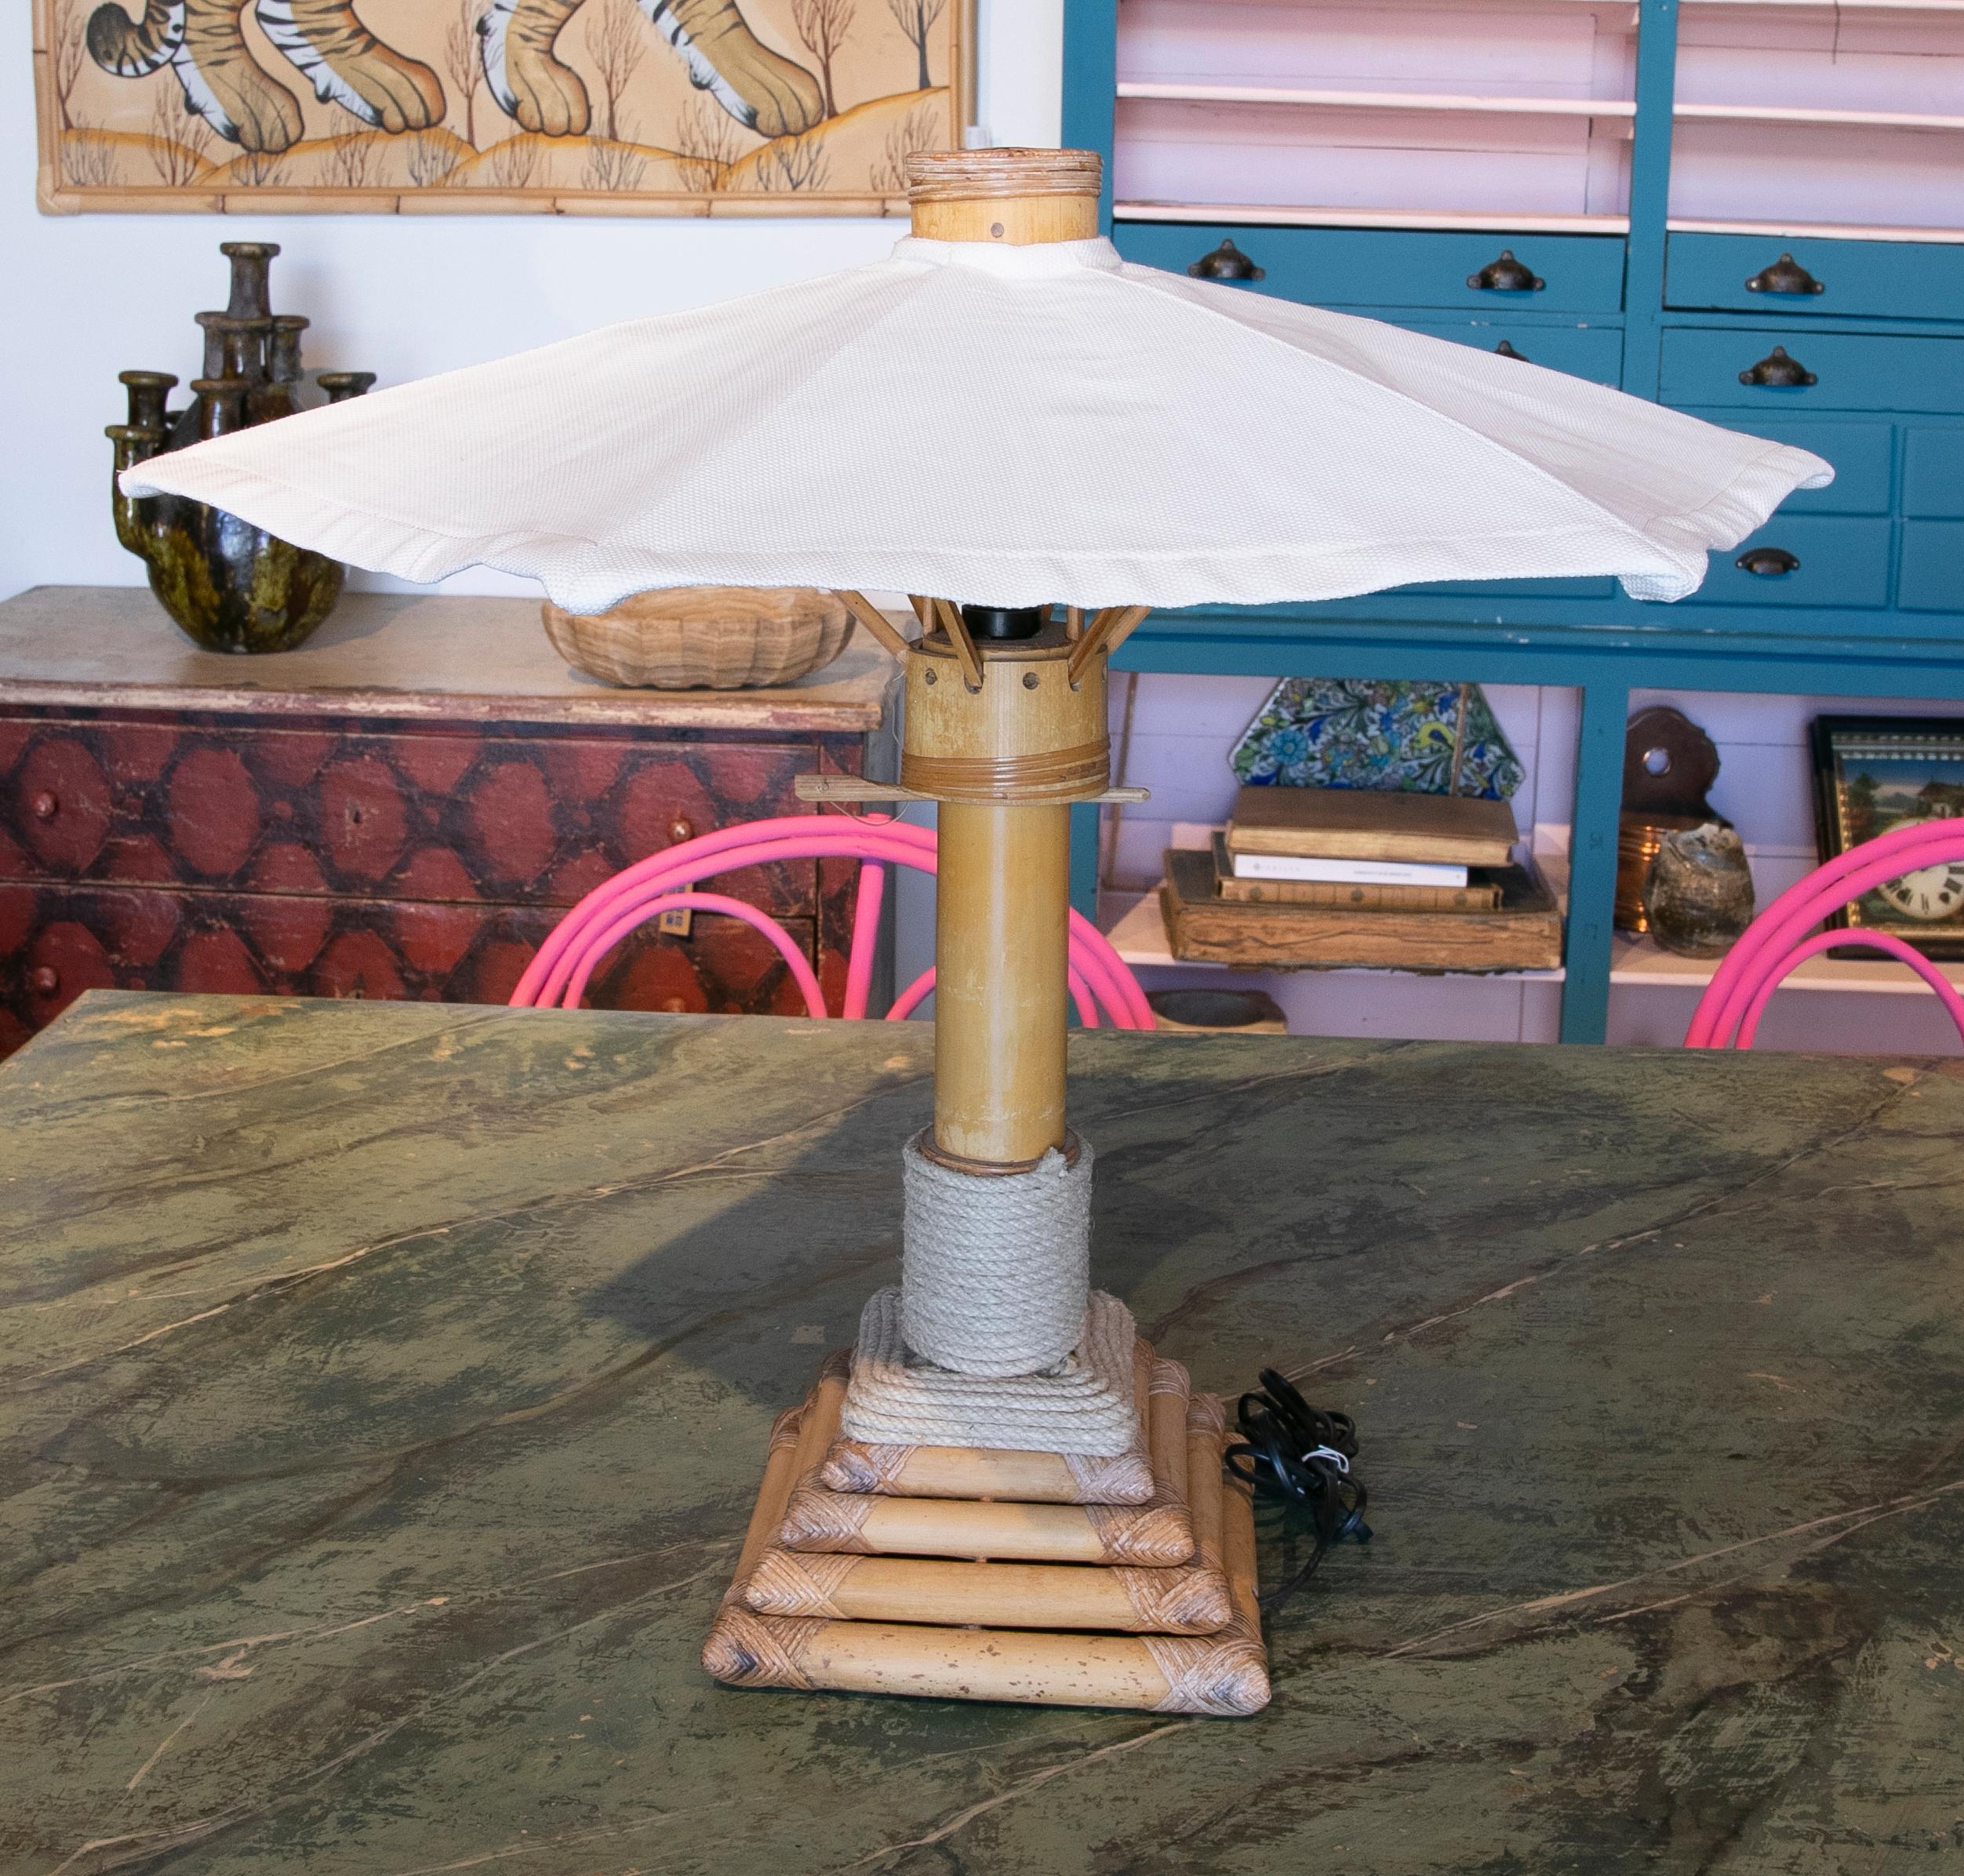 Spanish Pair of Bamboo Table Lamps with Garden Parasols Shape from the 1970ies